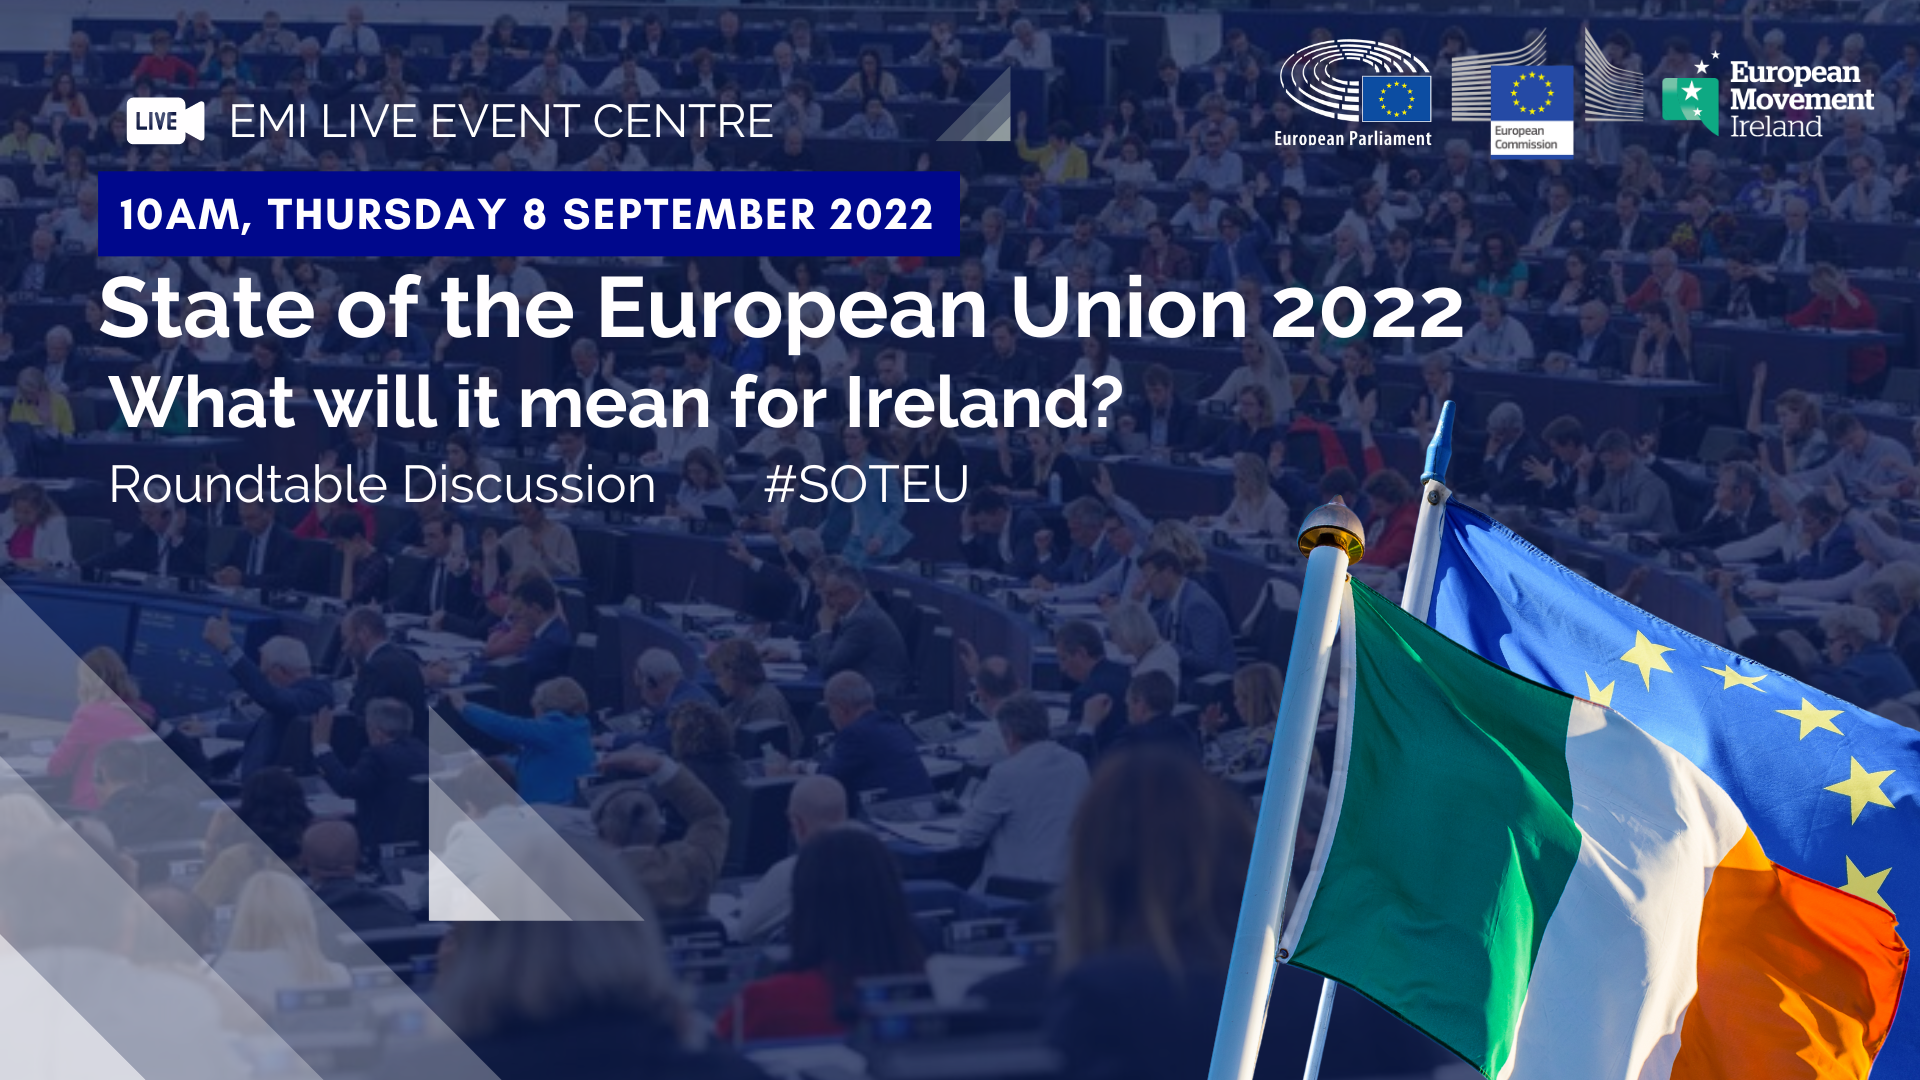 Promotional image for the State of the European Union event on 8 September 2022